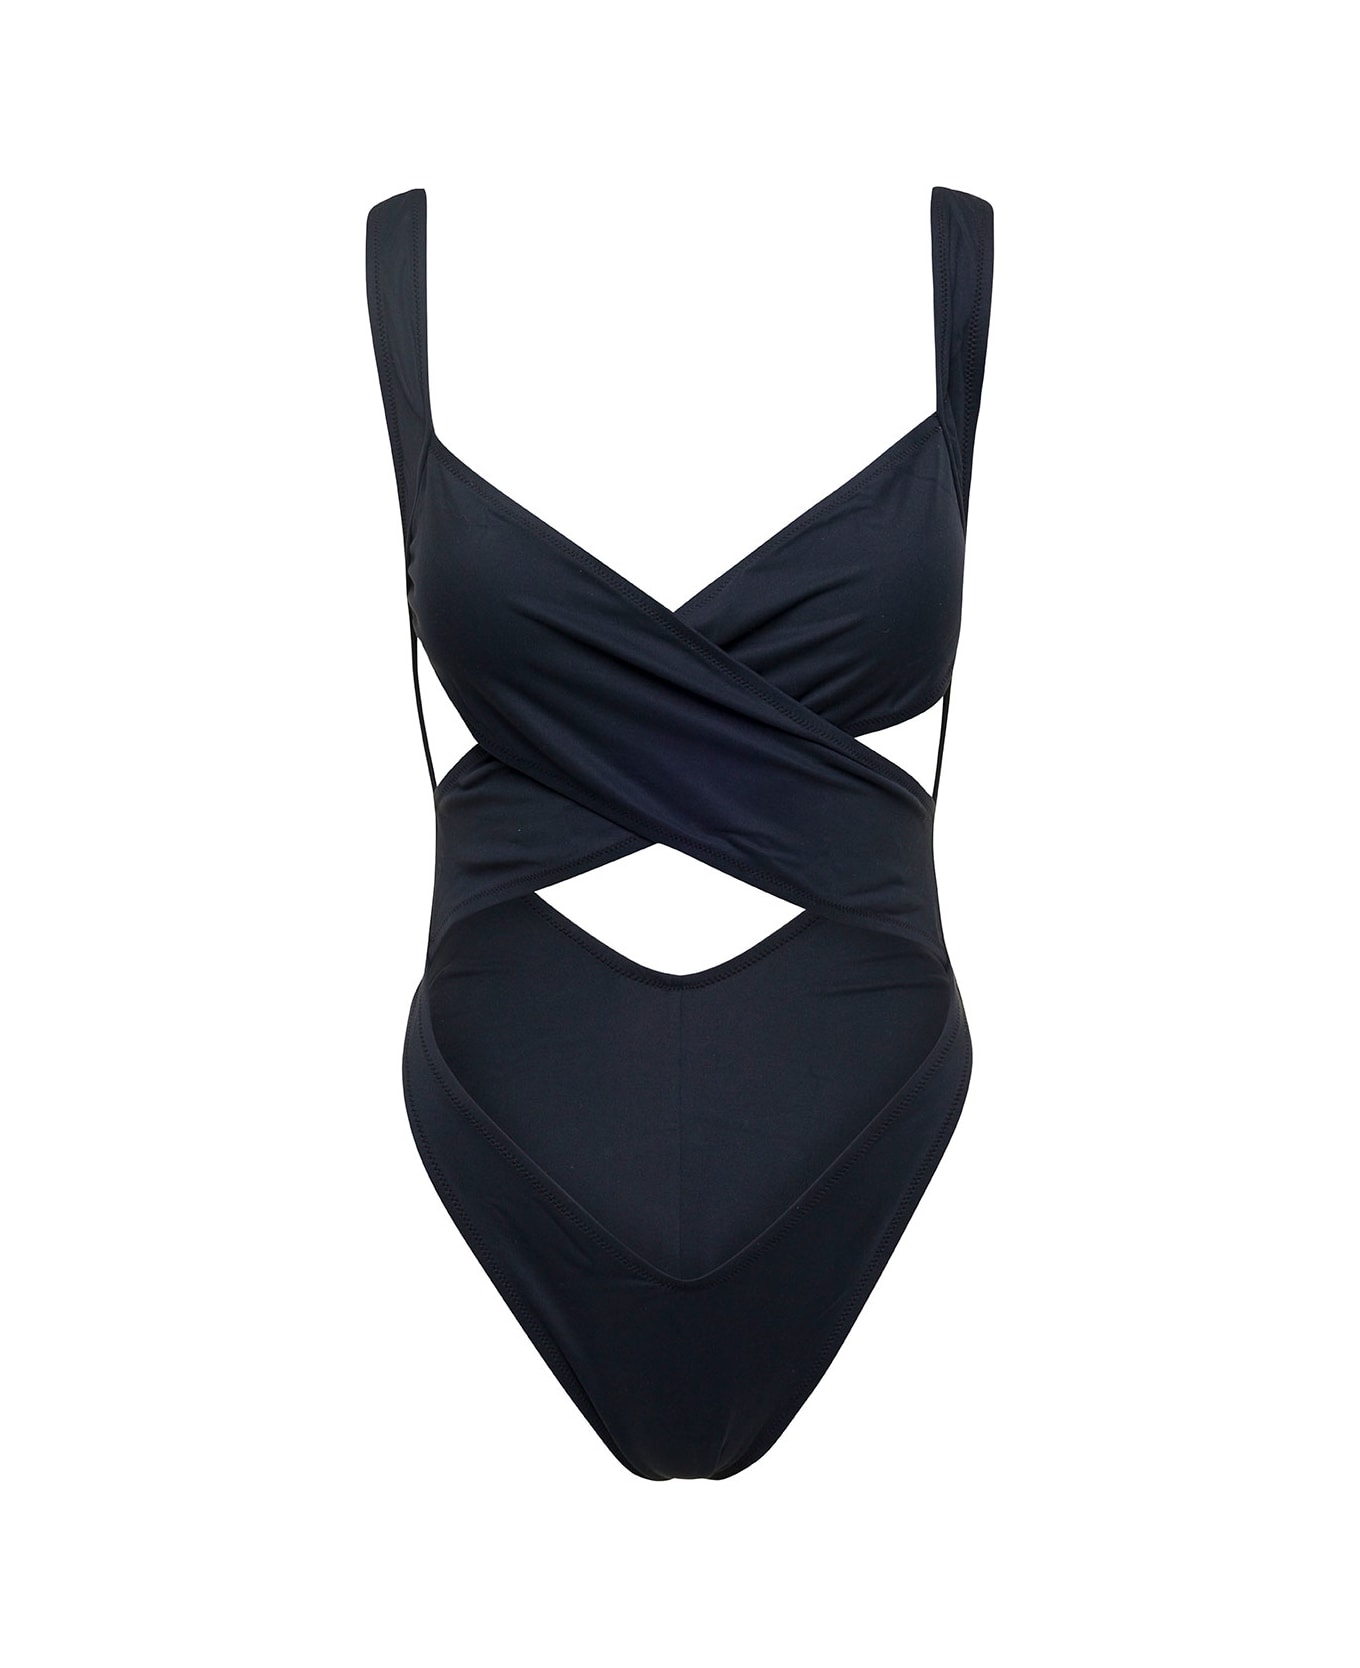 Reina Olga 'exotica' Black One-piece Swimsuit With Cut-out And Cross-strap In Polyamide Stretch Woman - Black